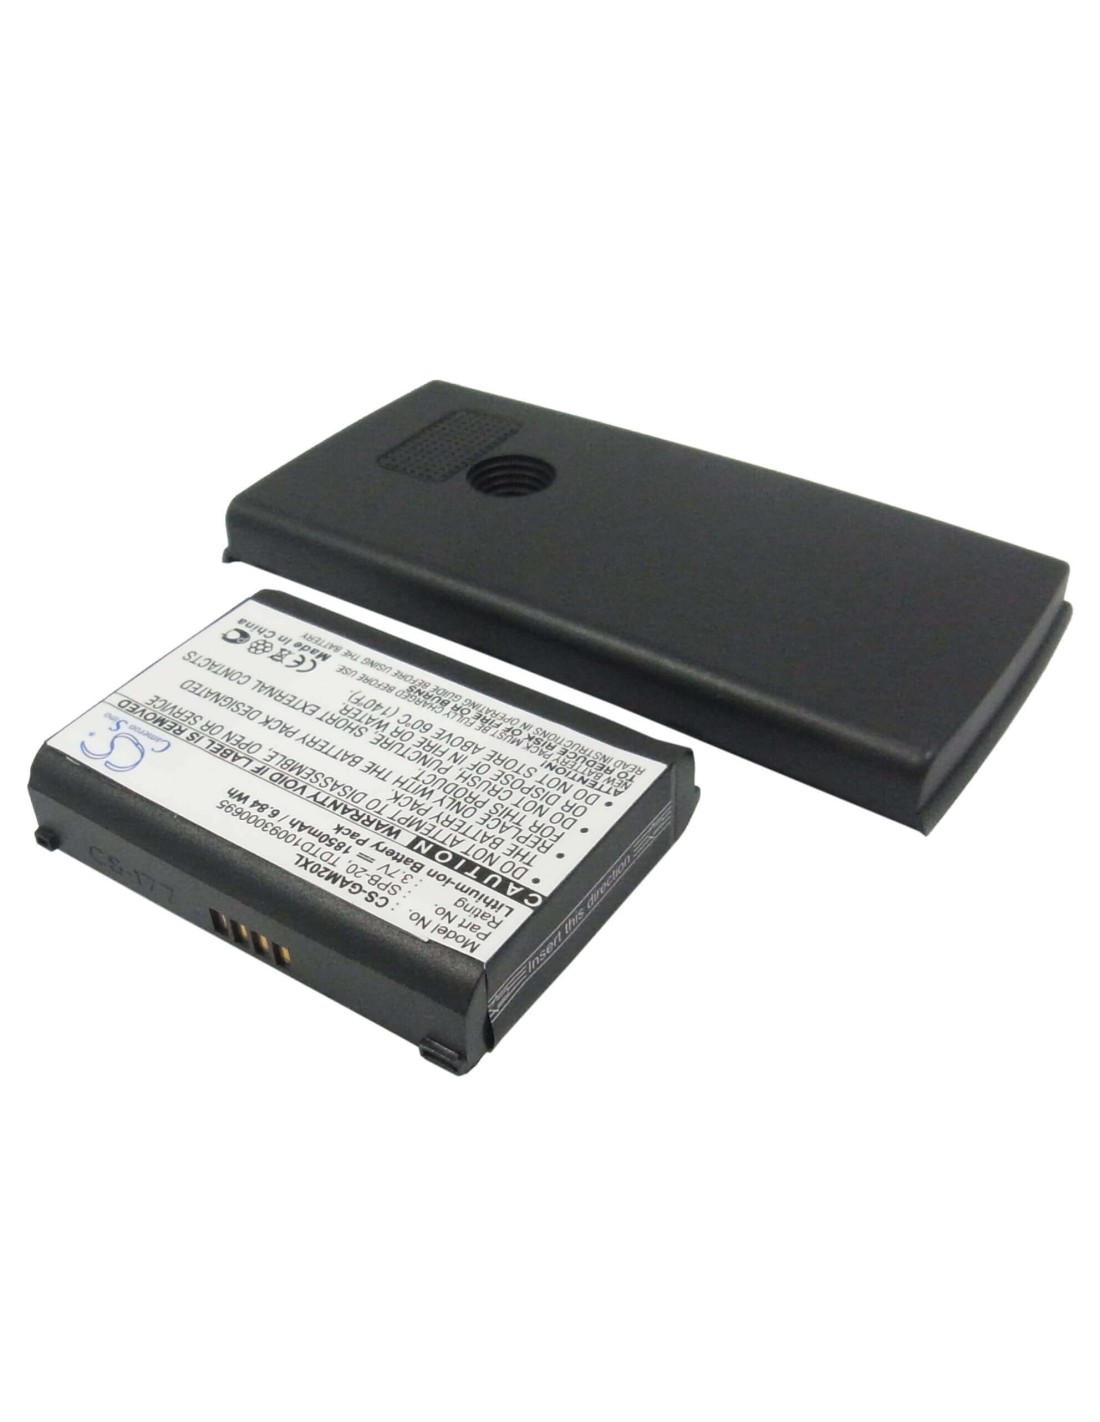 Battery for Garmin-Asus nuvifone M20, nuvifone M20 US 3.7V, 1850mAh - 6.85Wh